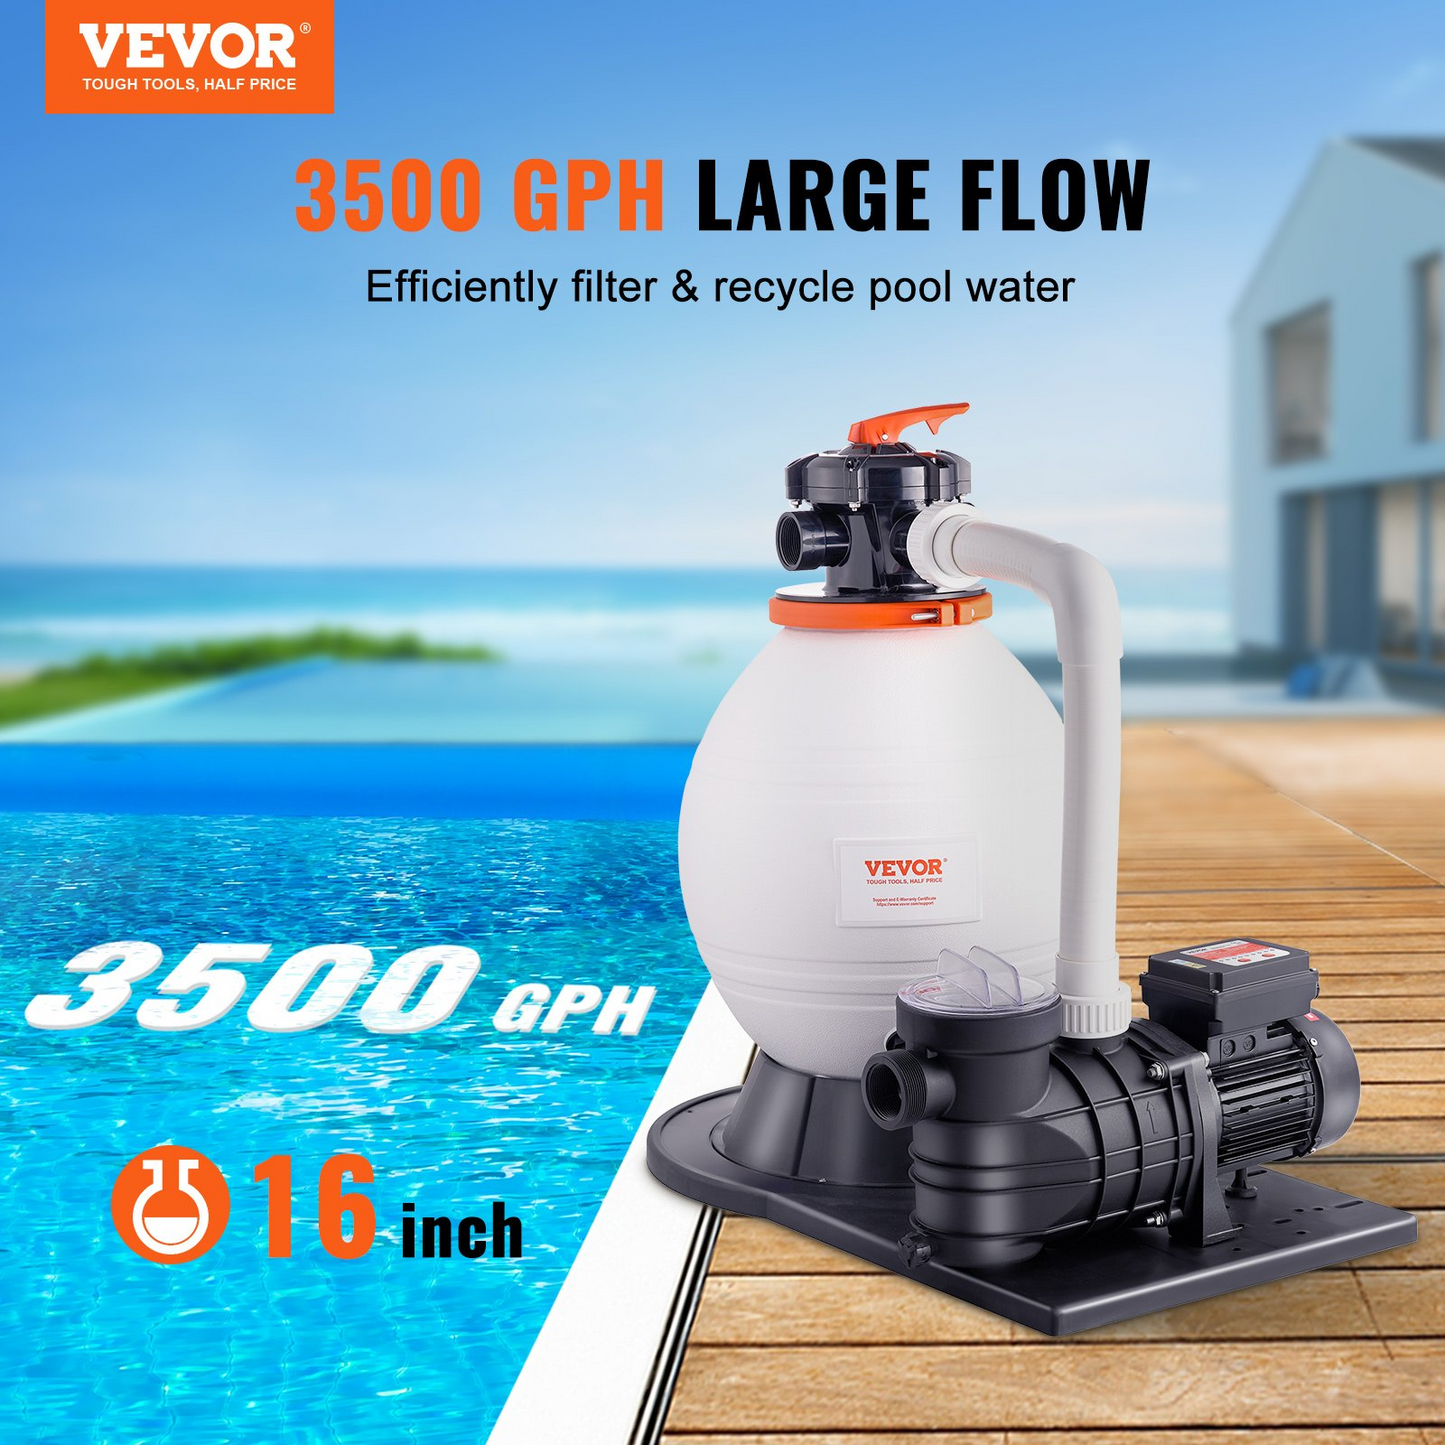 VEVOR Sand Filter Pump for Above Ground Pools, 16-inch, 3500 GPH, 1 HP Swimming Pool Pumps System & Filters Combo Set with 6-Way Multi-Port Valve and Strainer Basket, for Domestic and Commercial Pools, Goodies N Stuff